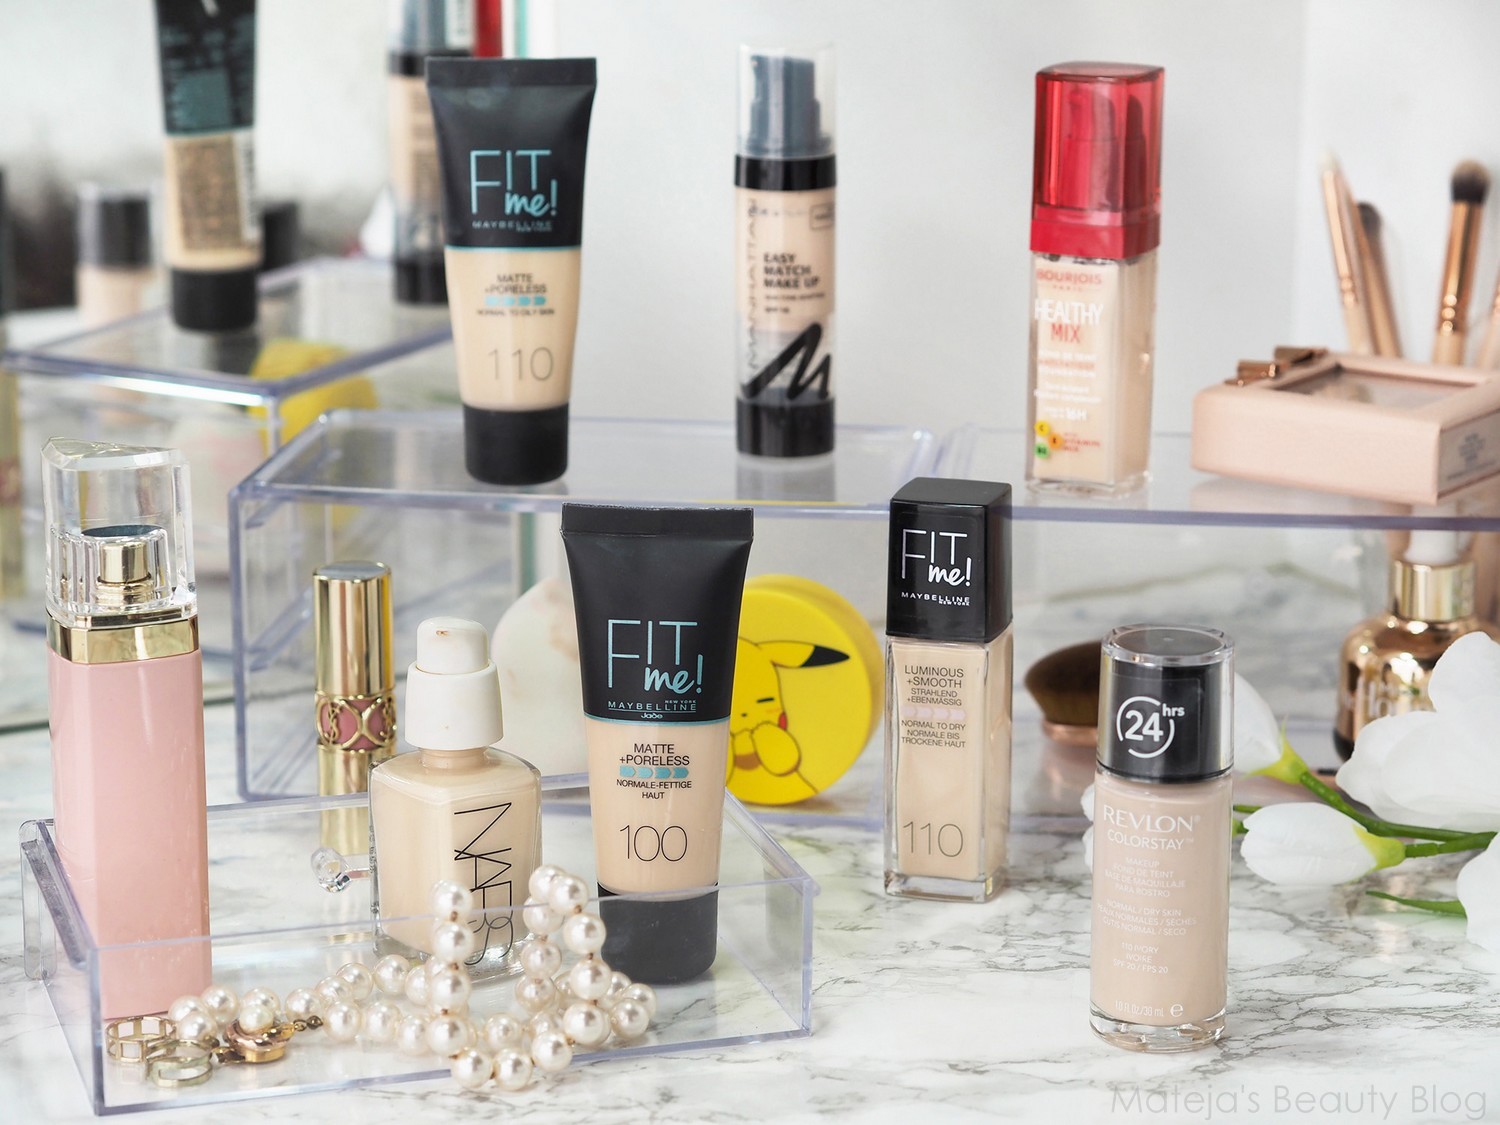 Pale Foundations & Foundation Shade Lighteners